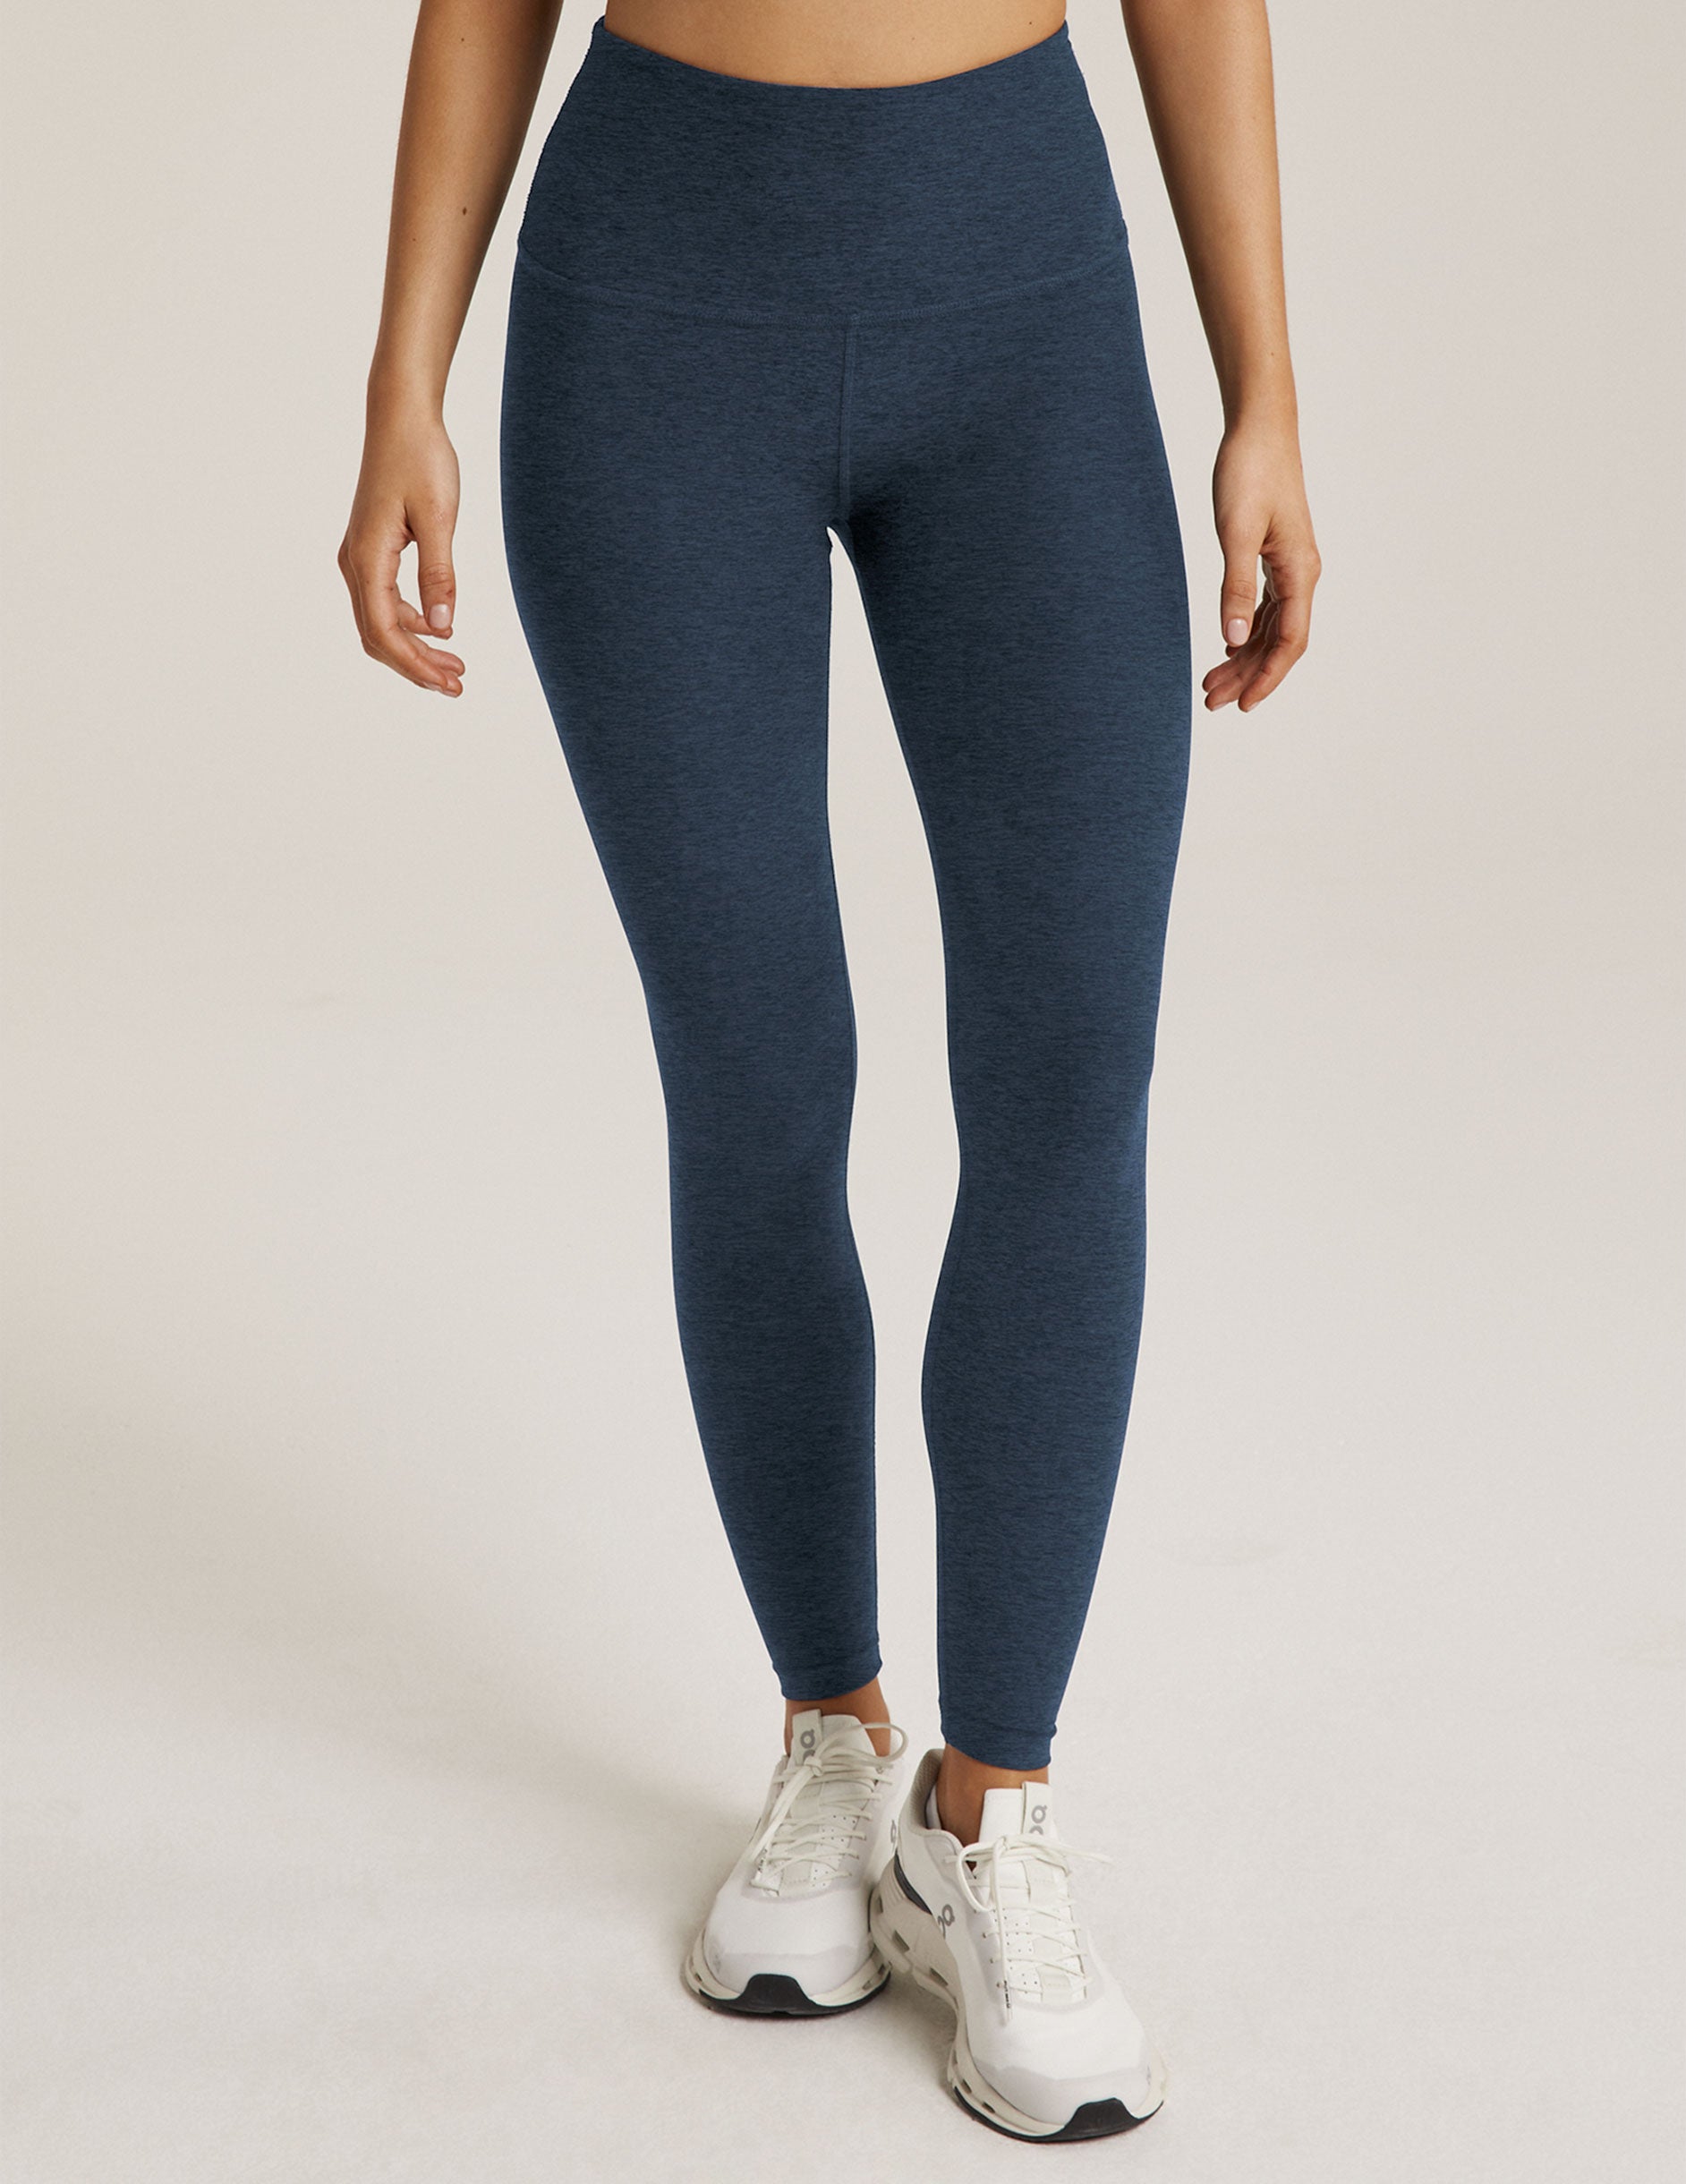 High Waisted Navy Leggings With Double Pockets – Born, 43% OFF